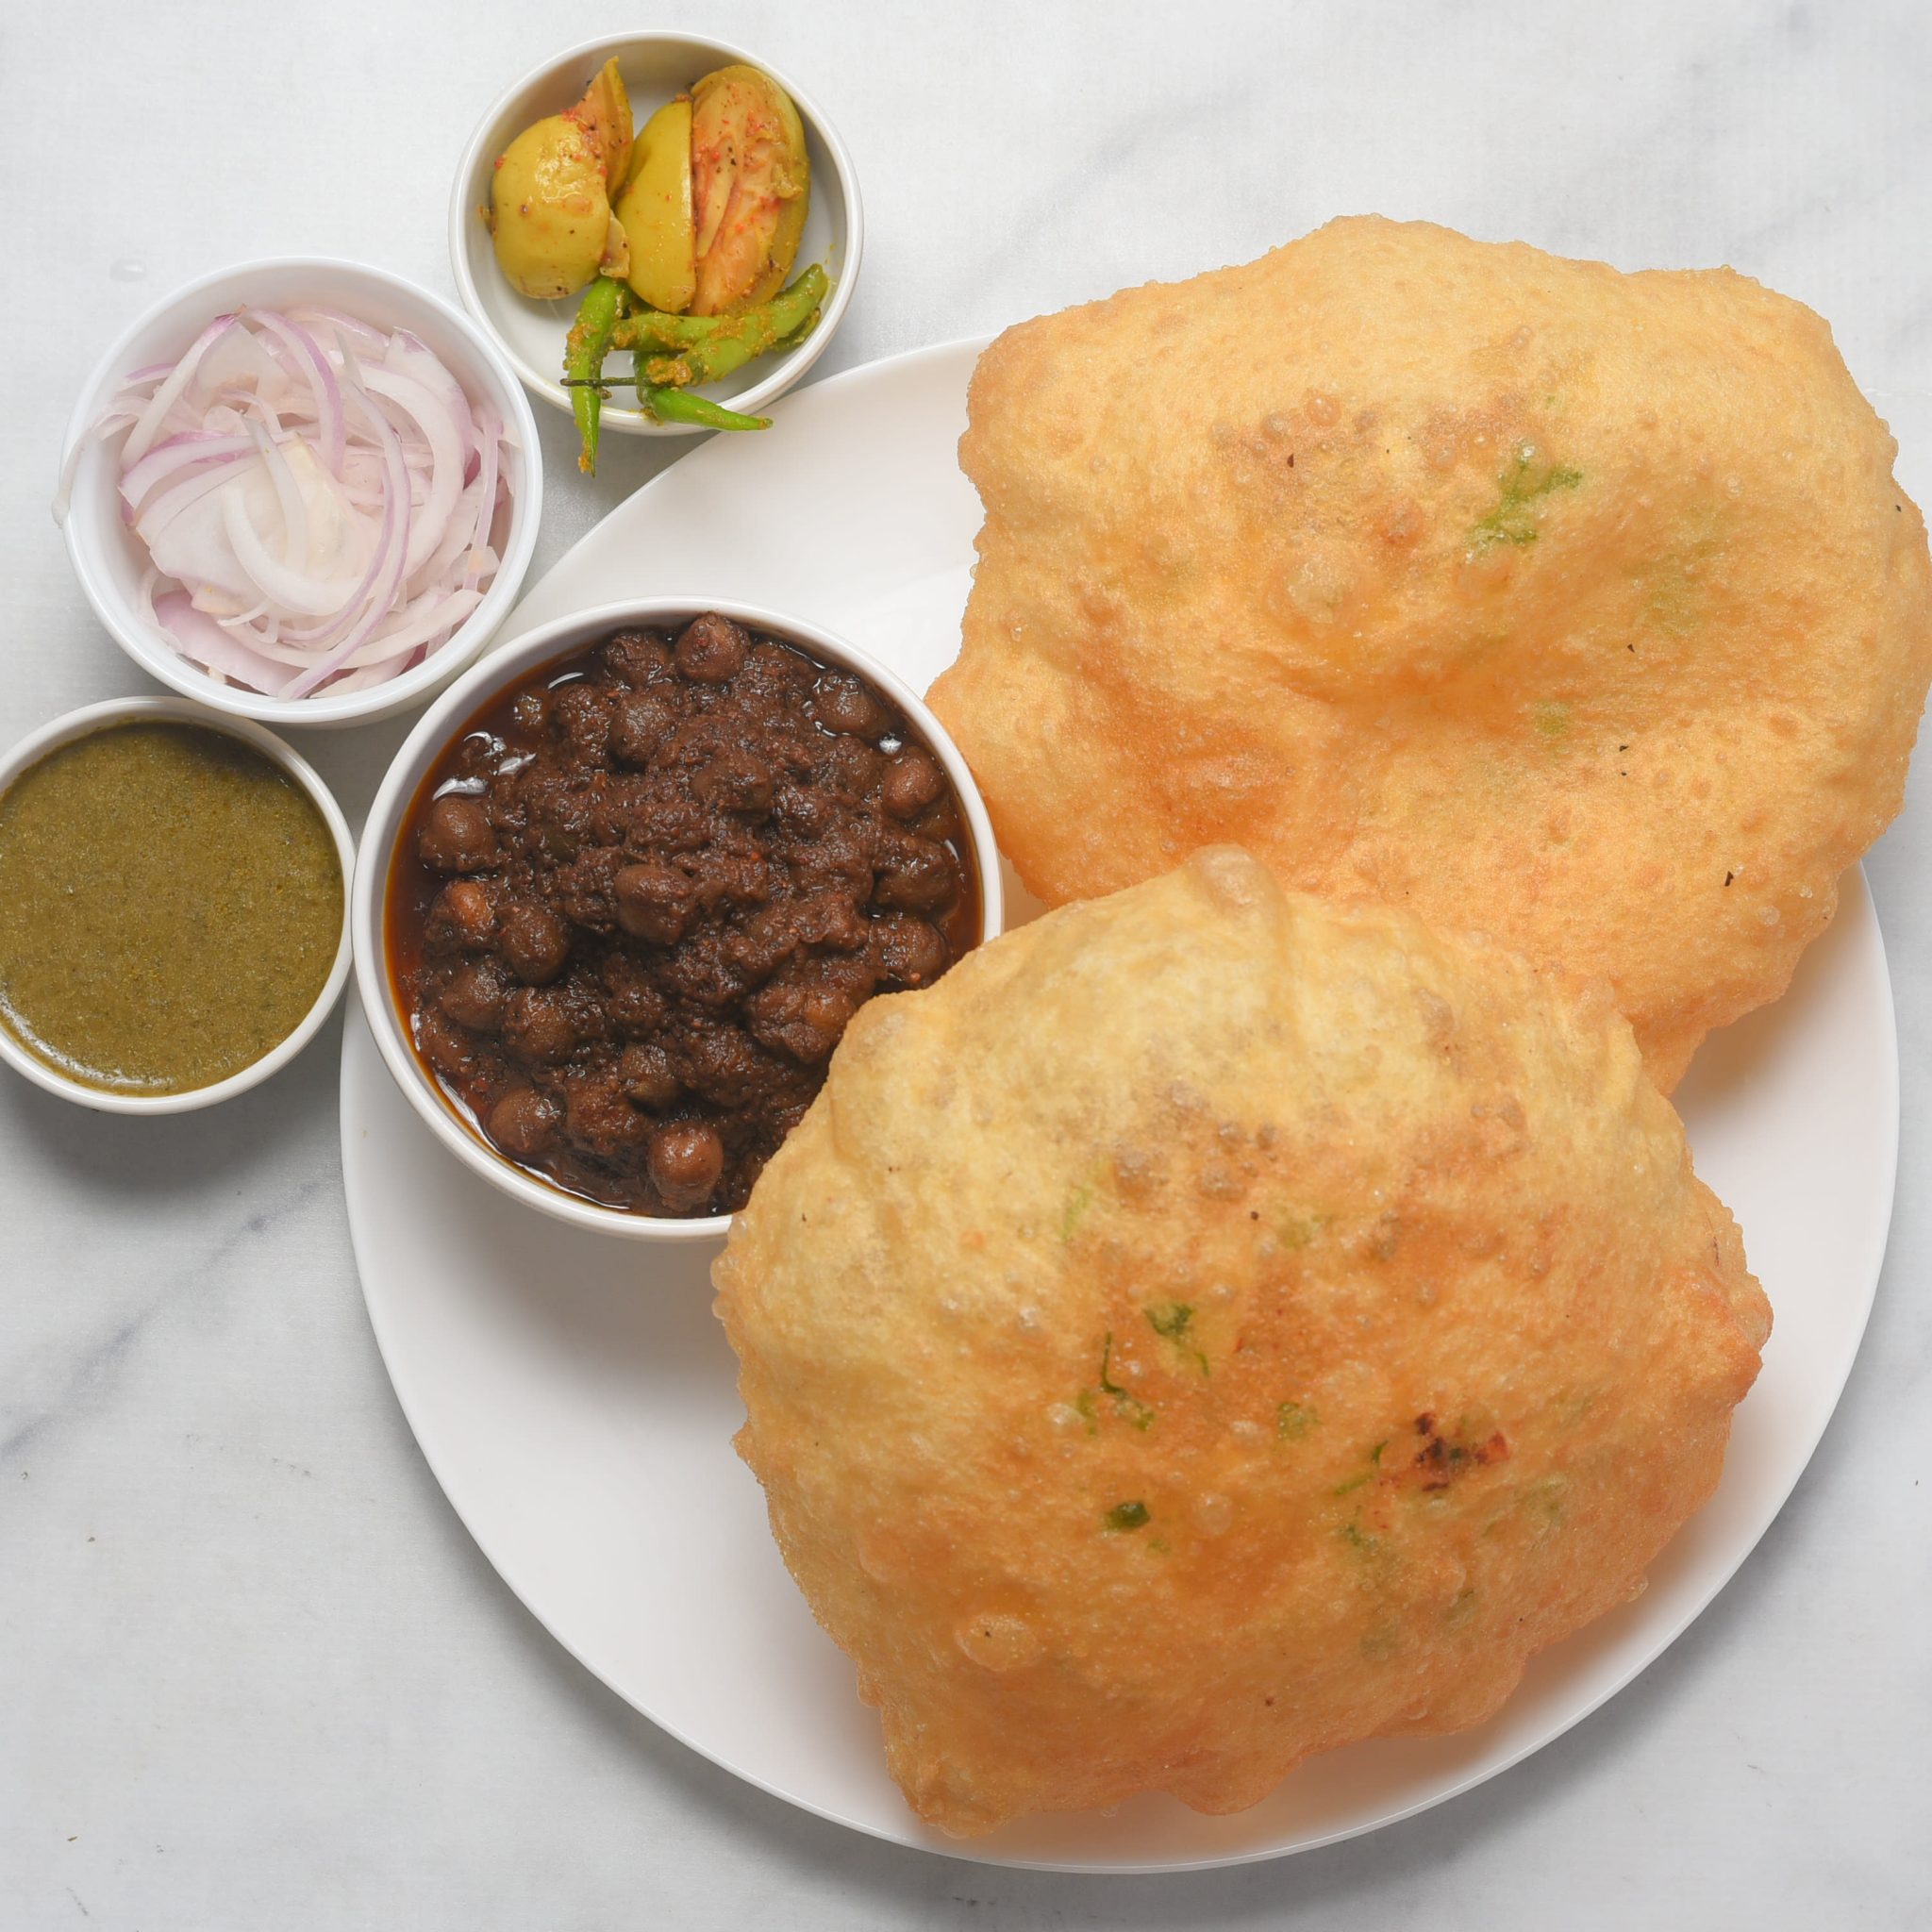 15 Legendary Places To Eat Best Chole Bhature in Delhi 2022 - My Yellow